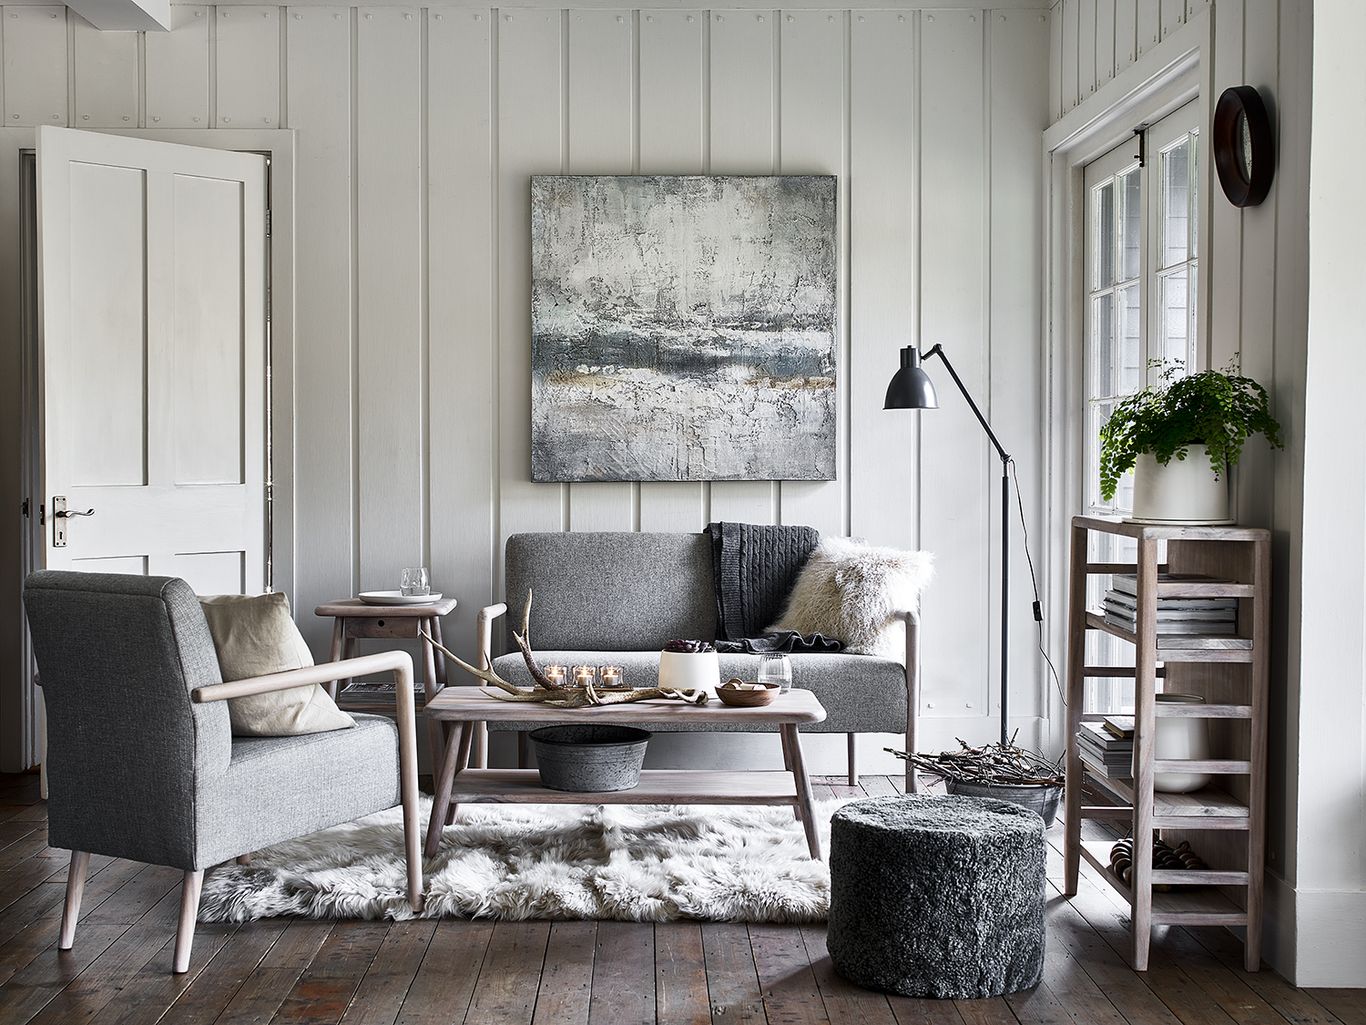 Grey and white living room ideas - how to pair this perfect colour